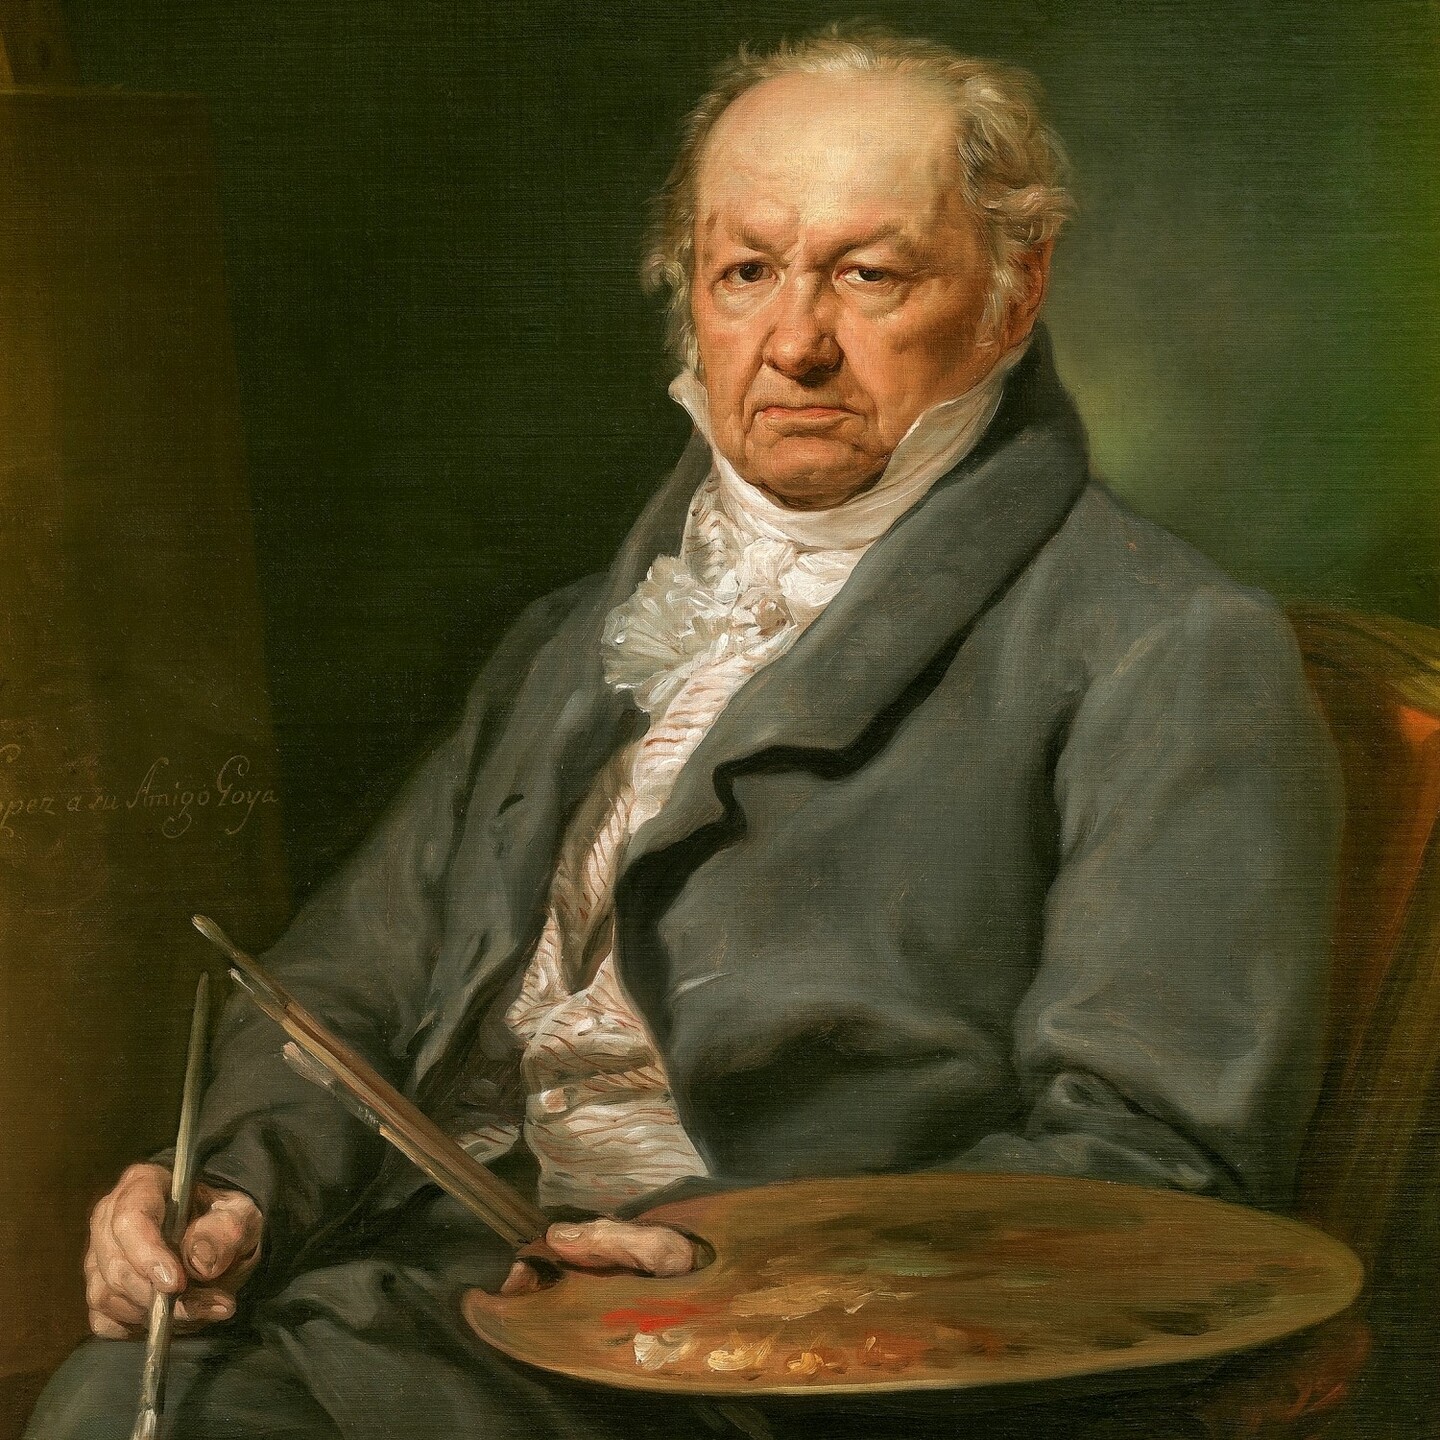 Goya seated, holding a paint palette in one hand, a brush in the other